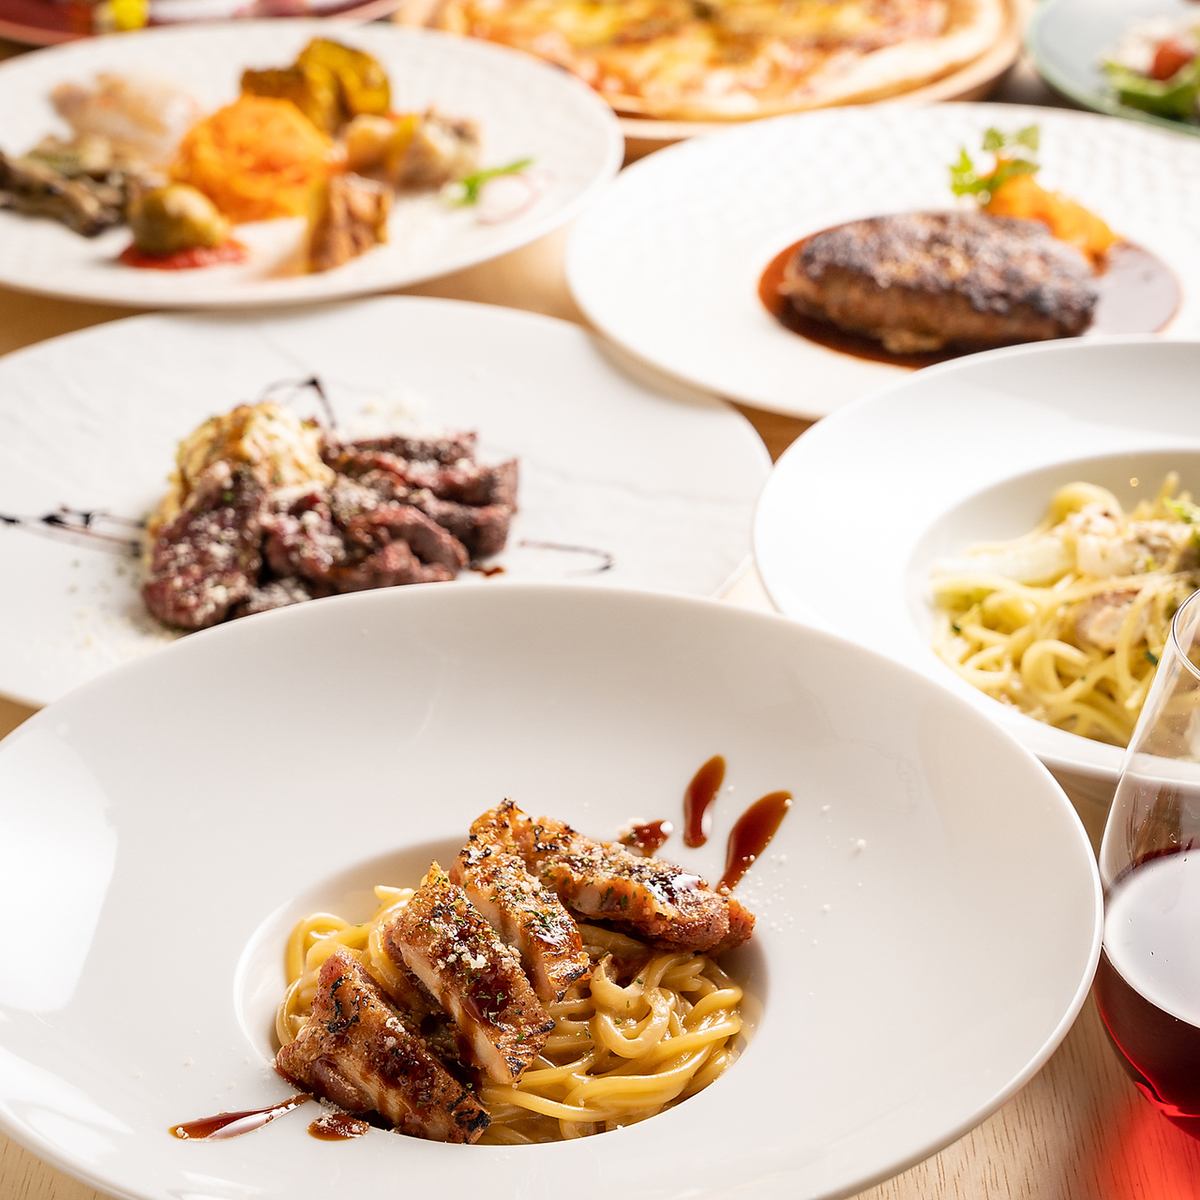 Please spend a luxurious time with authentic Italian course meals